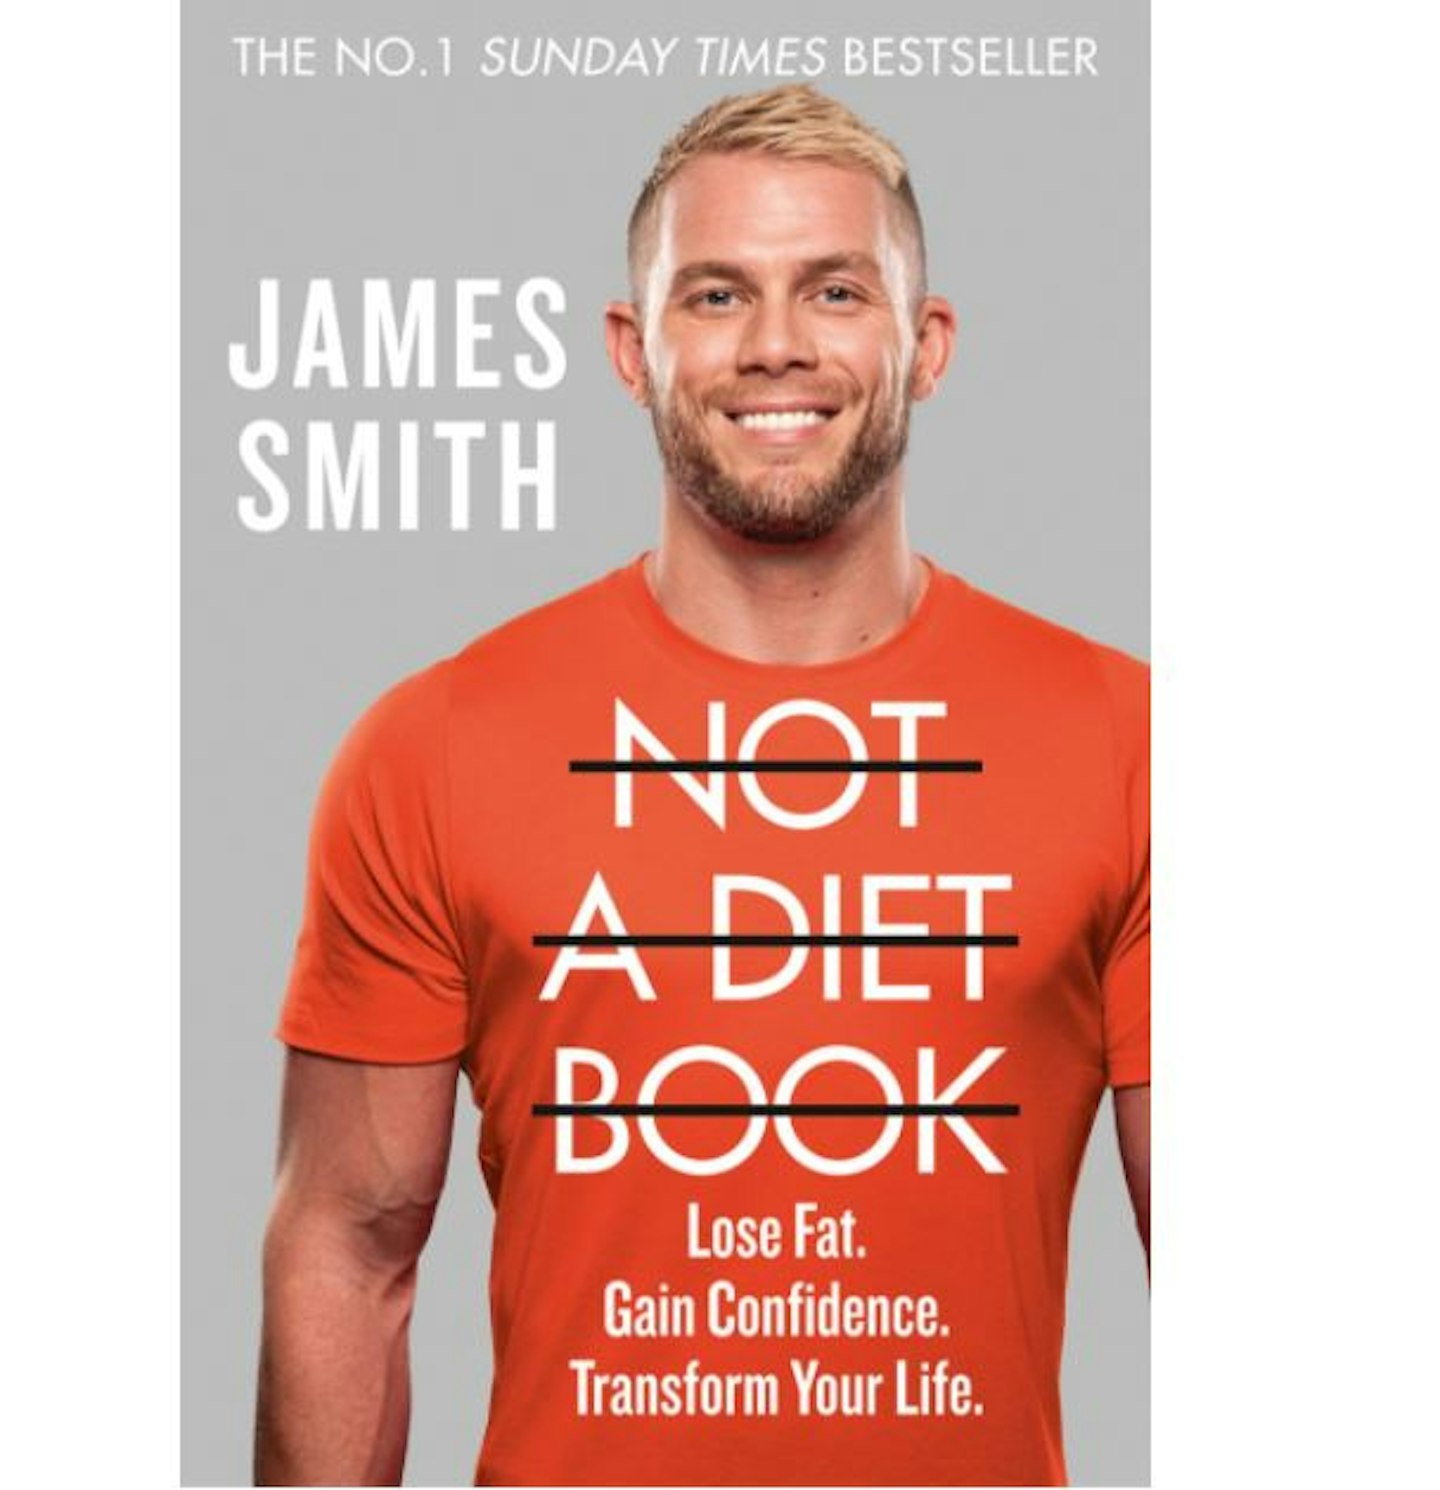 Not a Diet Book: Take Control. Gain Confidence. Change Your Life by James Smith